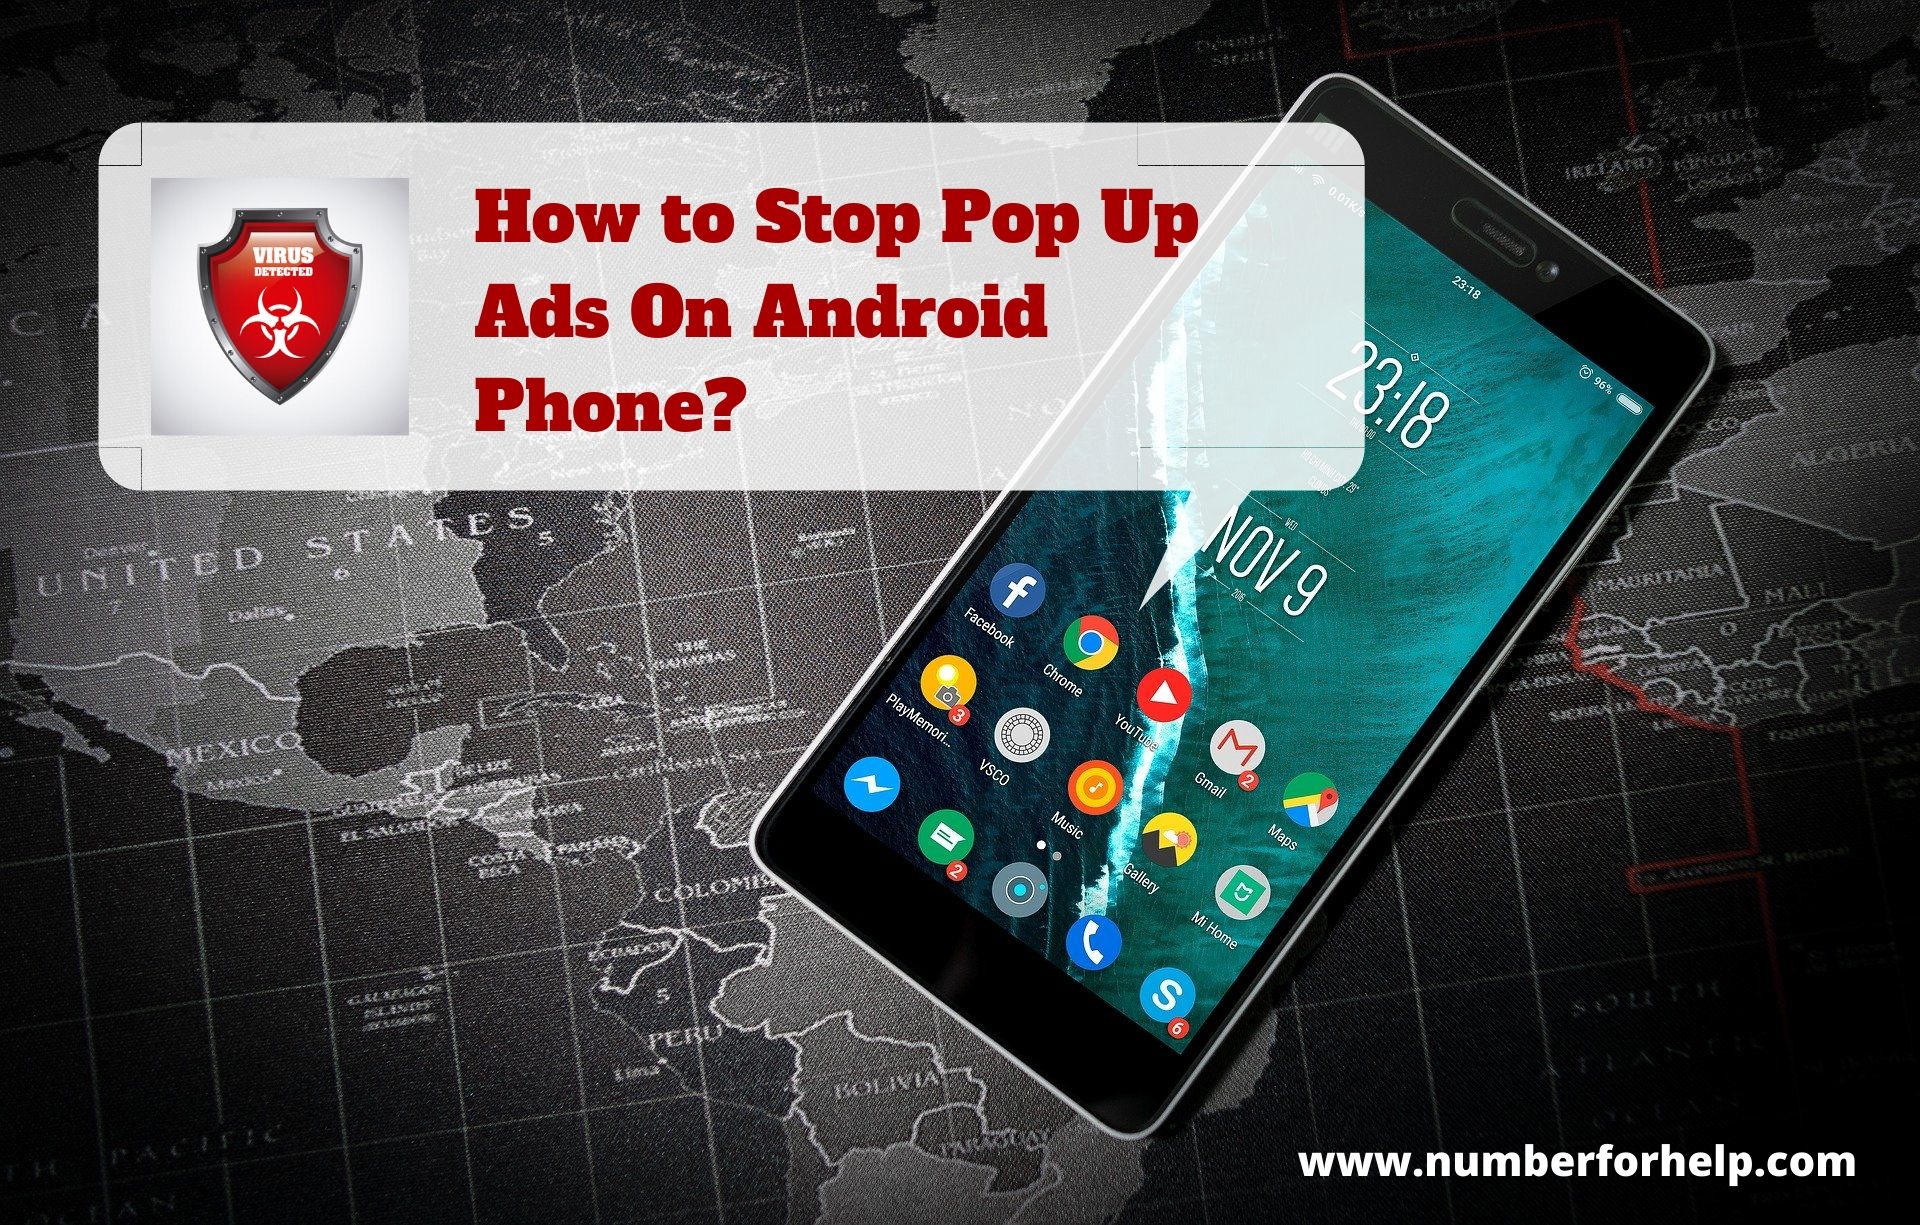 2019-11-25-11-39-44How to Stop Pop Up Ads On Android Phone